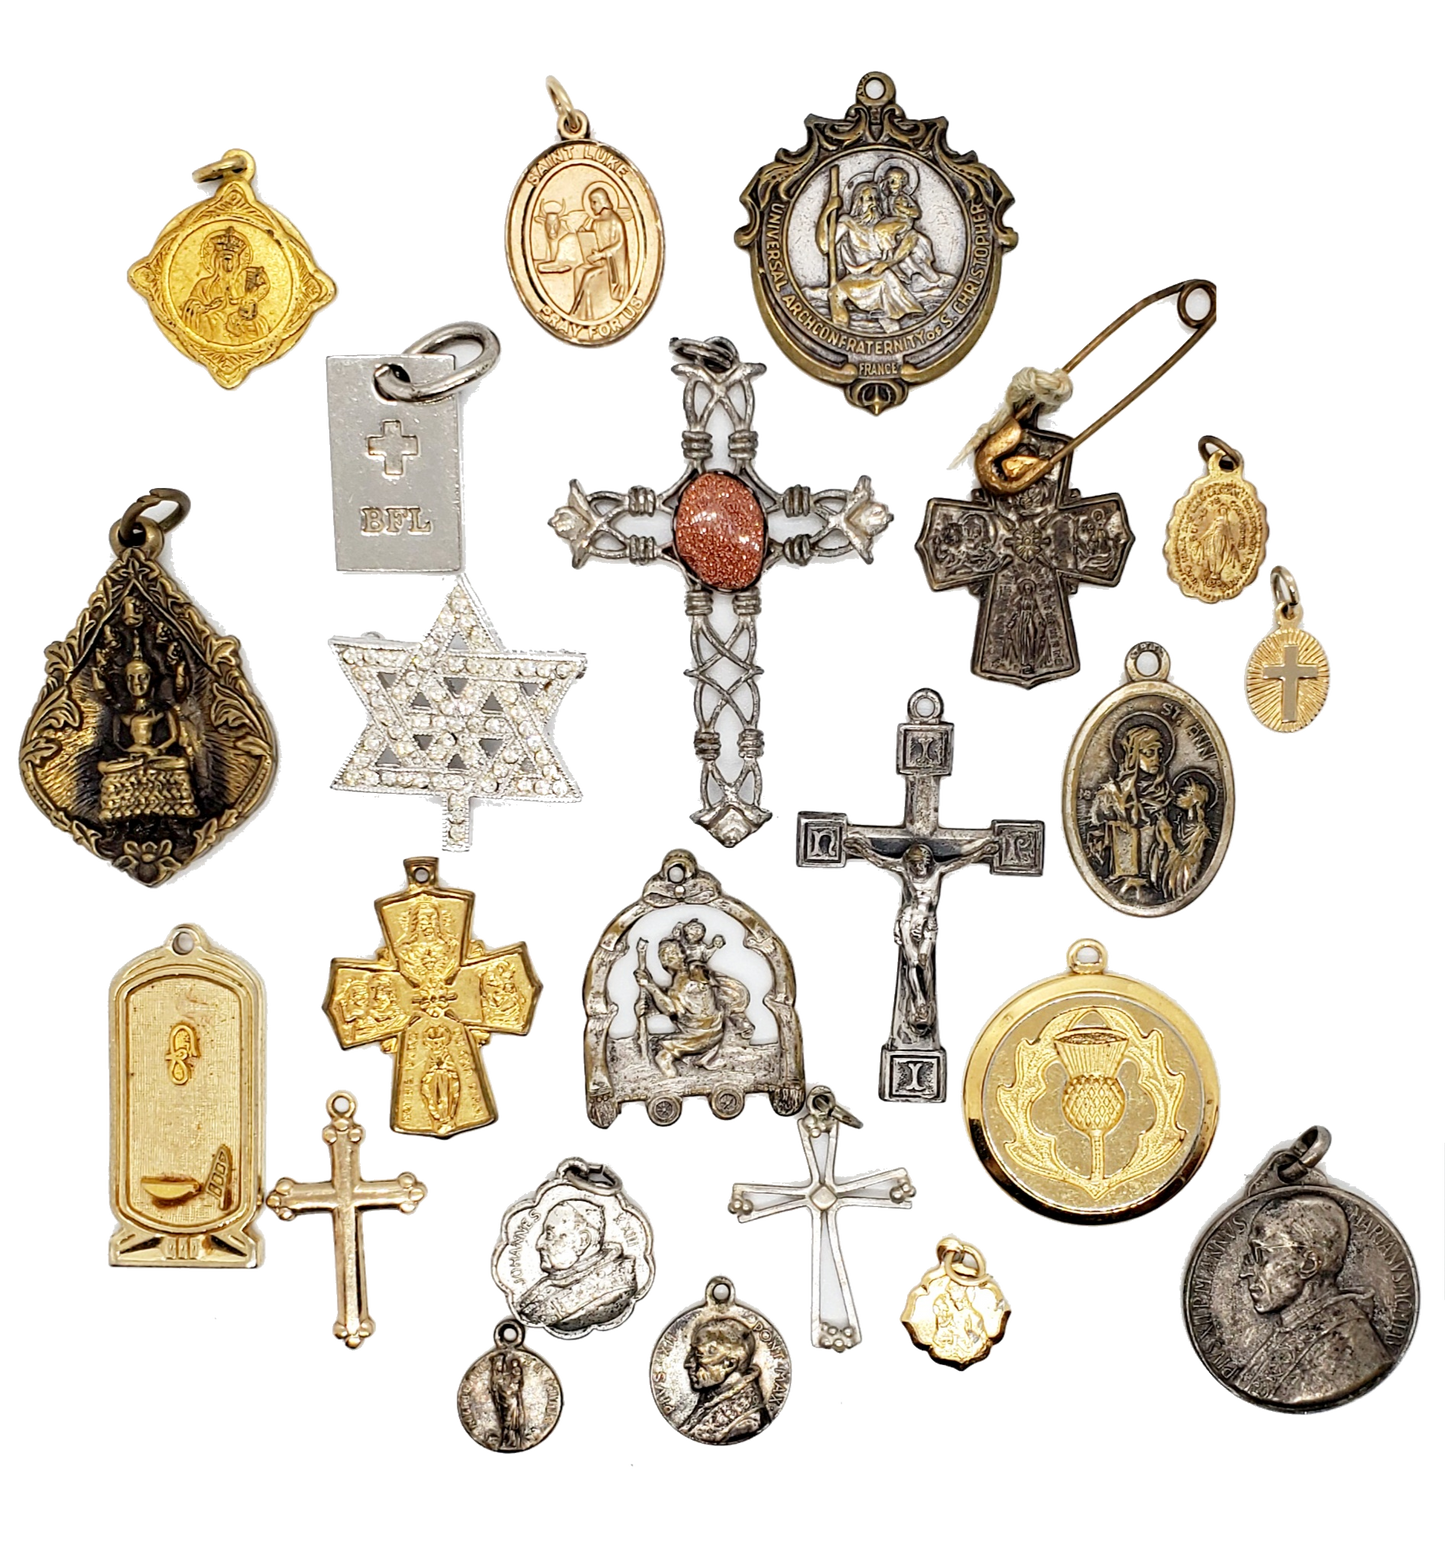 Lot Of Religious Pendent Charms|Vintage